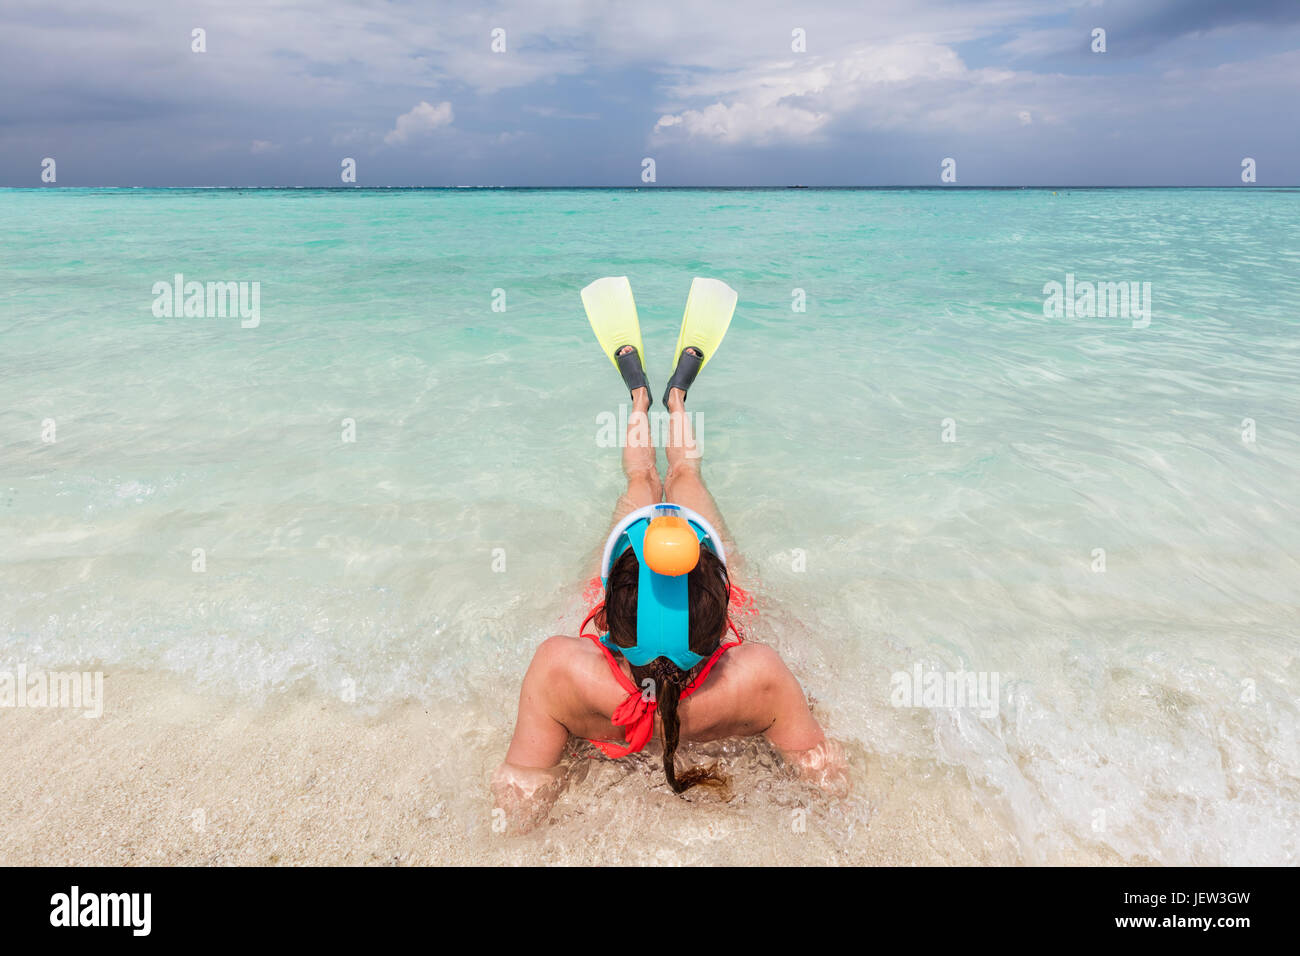 Woman wearing snorkeling mask and fins ready to snorkel in the ocean, Maldives. Clear turquoise water. Stock Photo